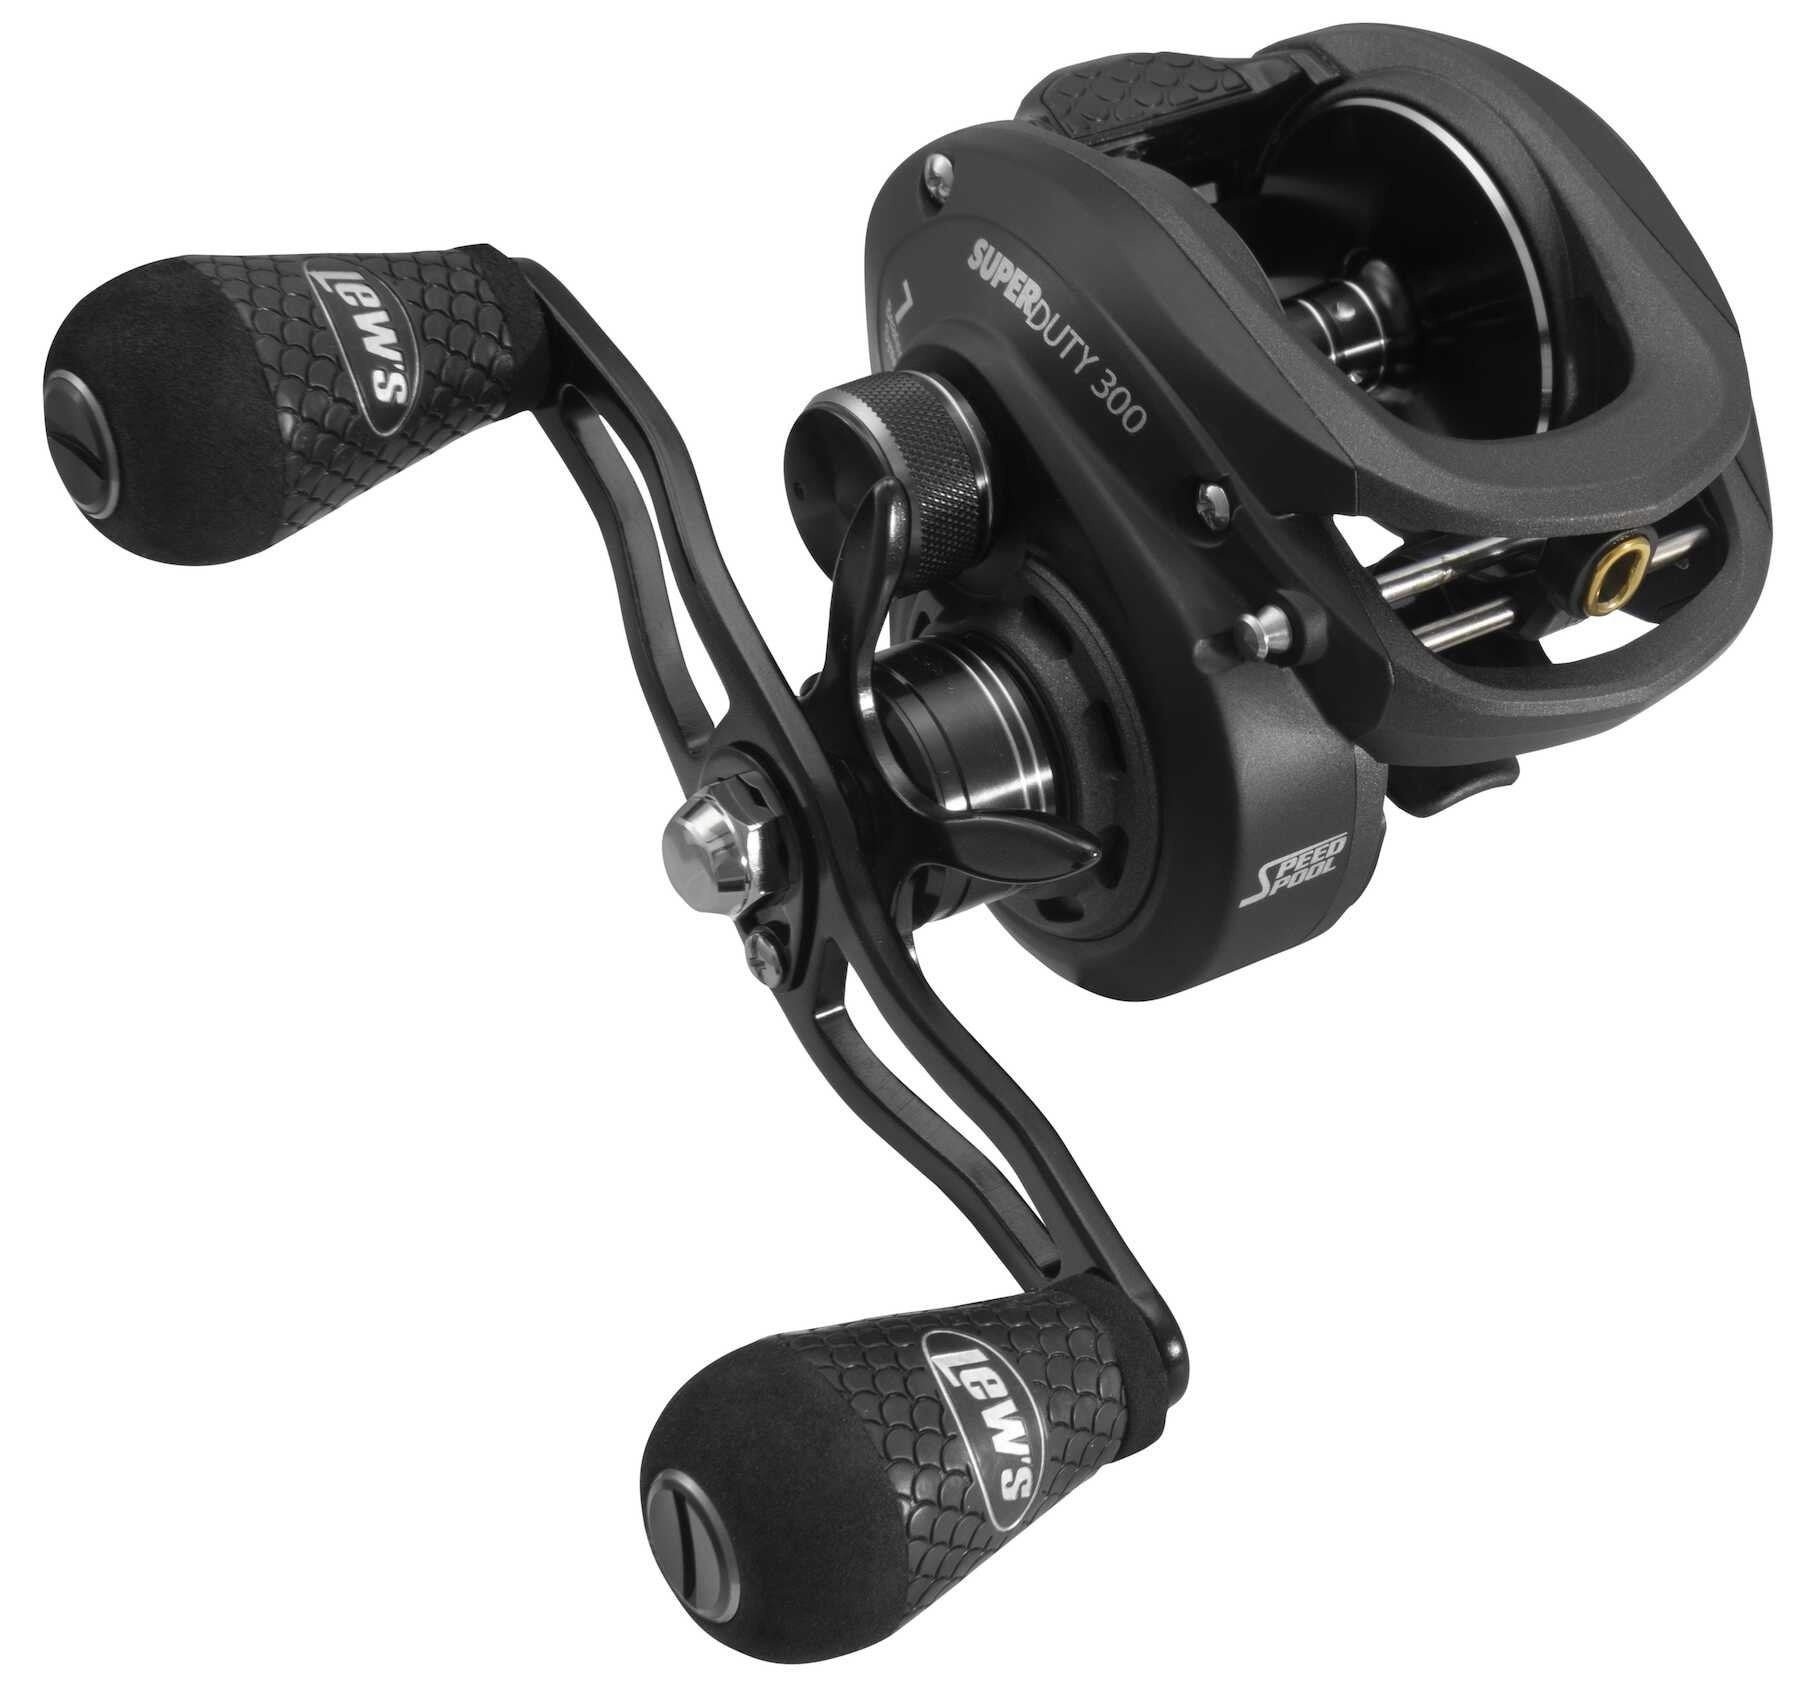 Lew's Superduty 300 Low Profile Reel - 6.8:1 - Hamilton Bait and Tackle